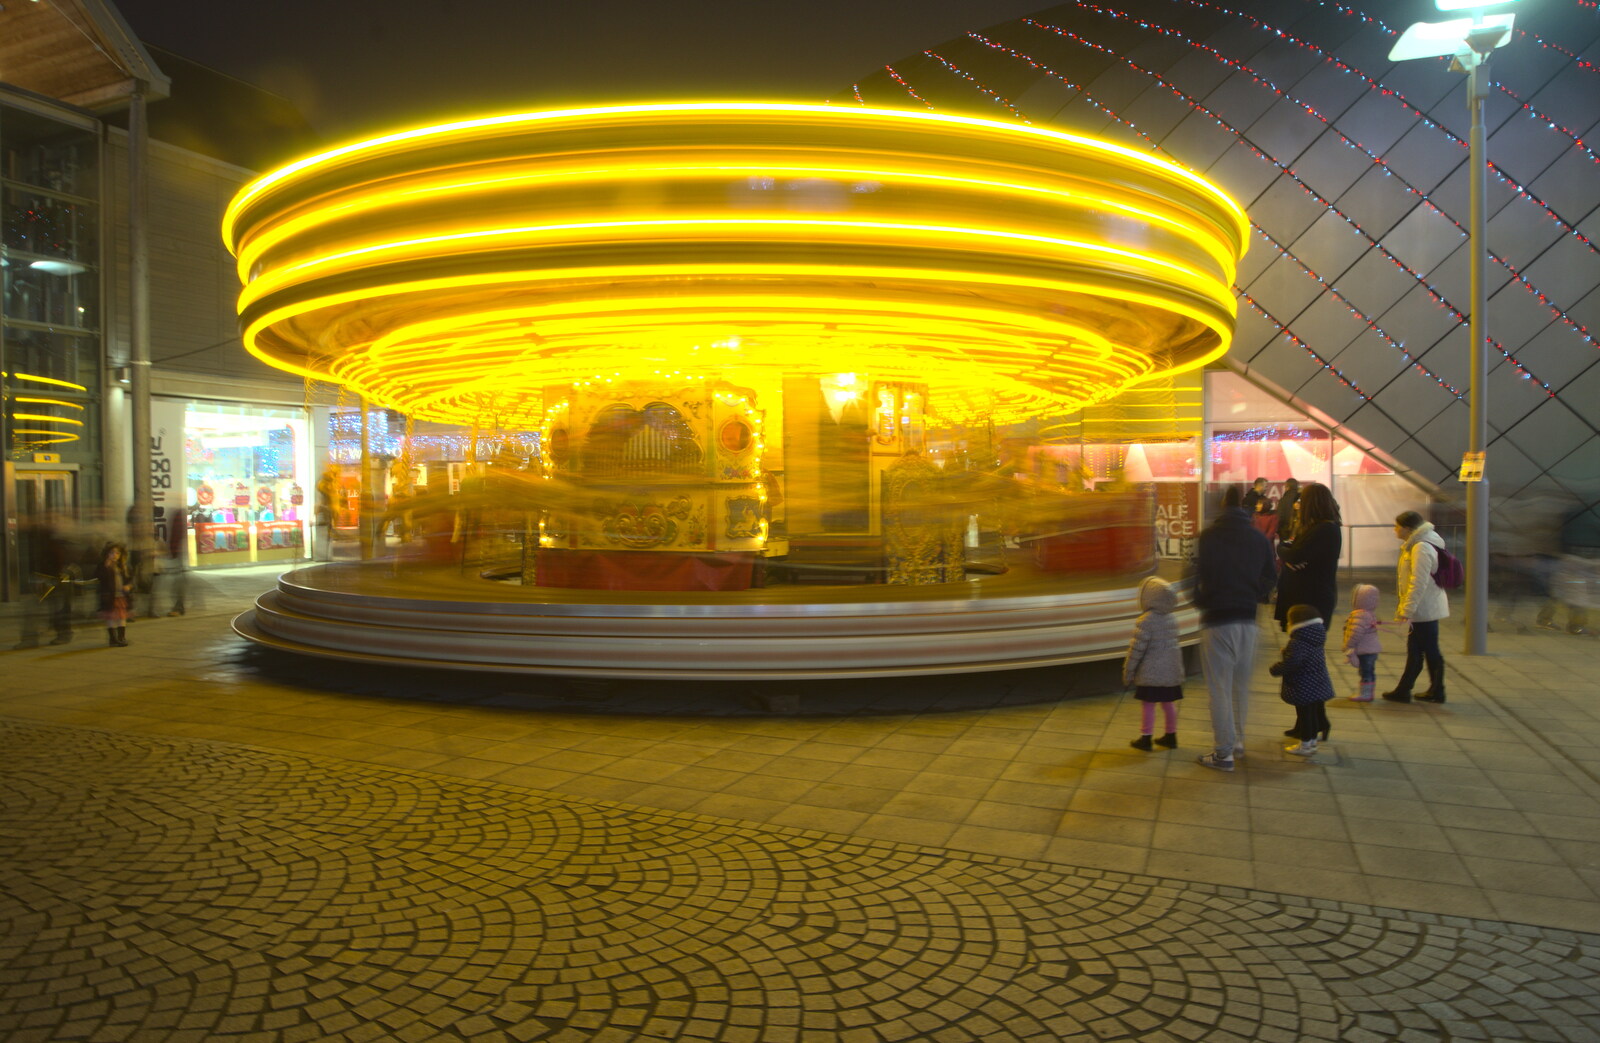 Carousel blur from A Trip to Ickworth House, Horringer, Suffolk - 30th December 2016